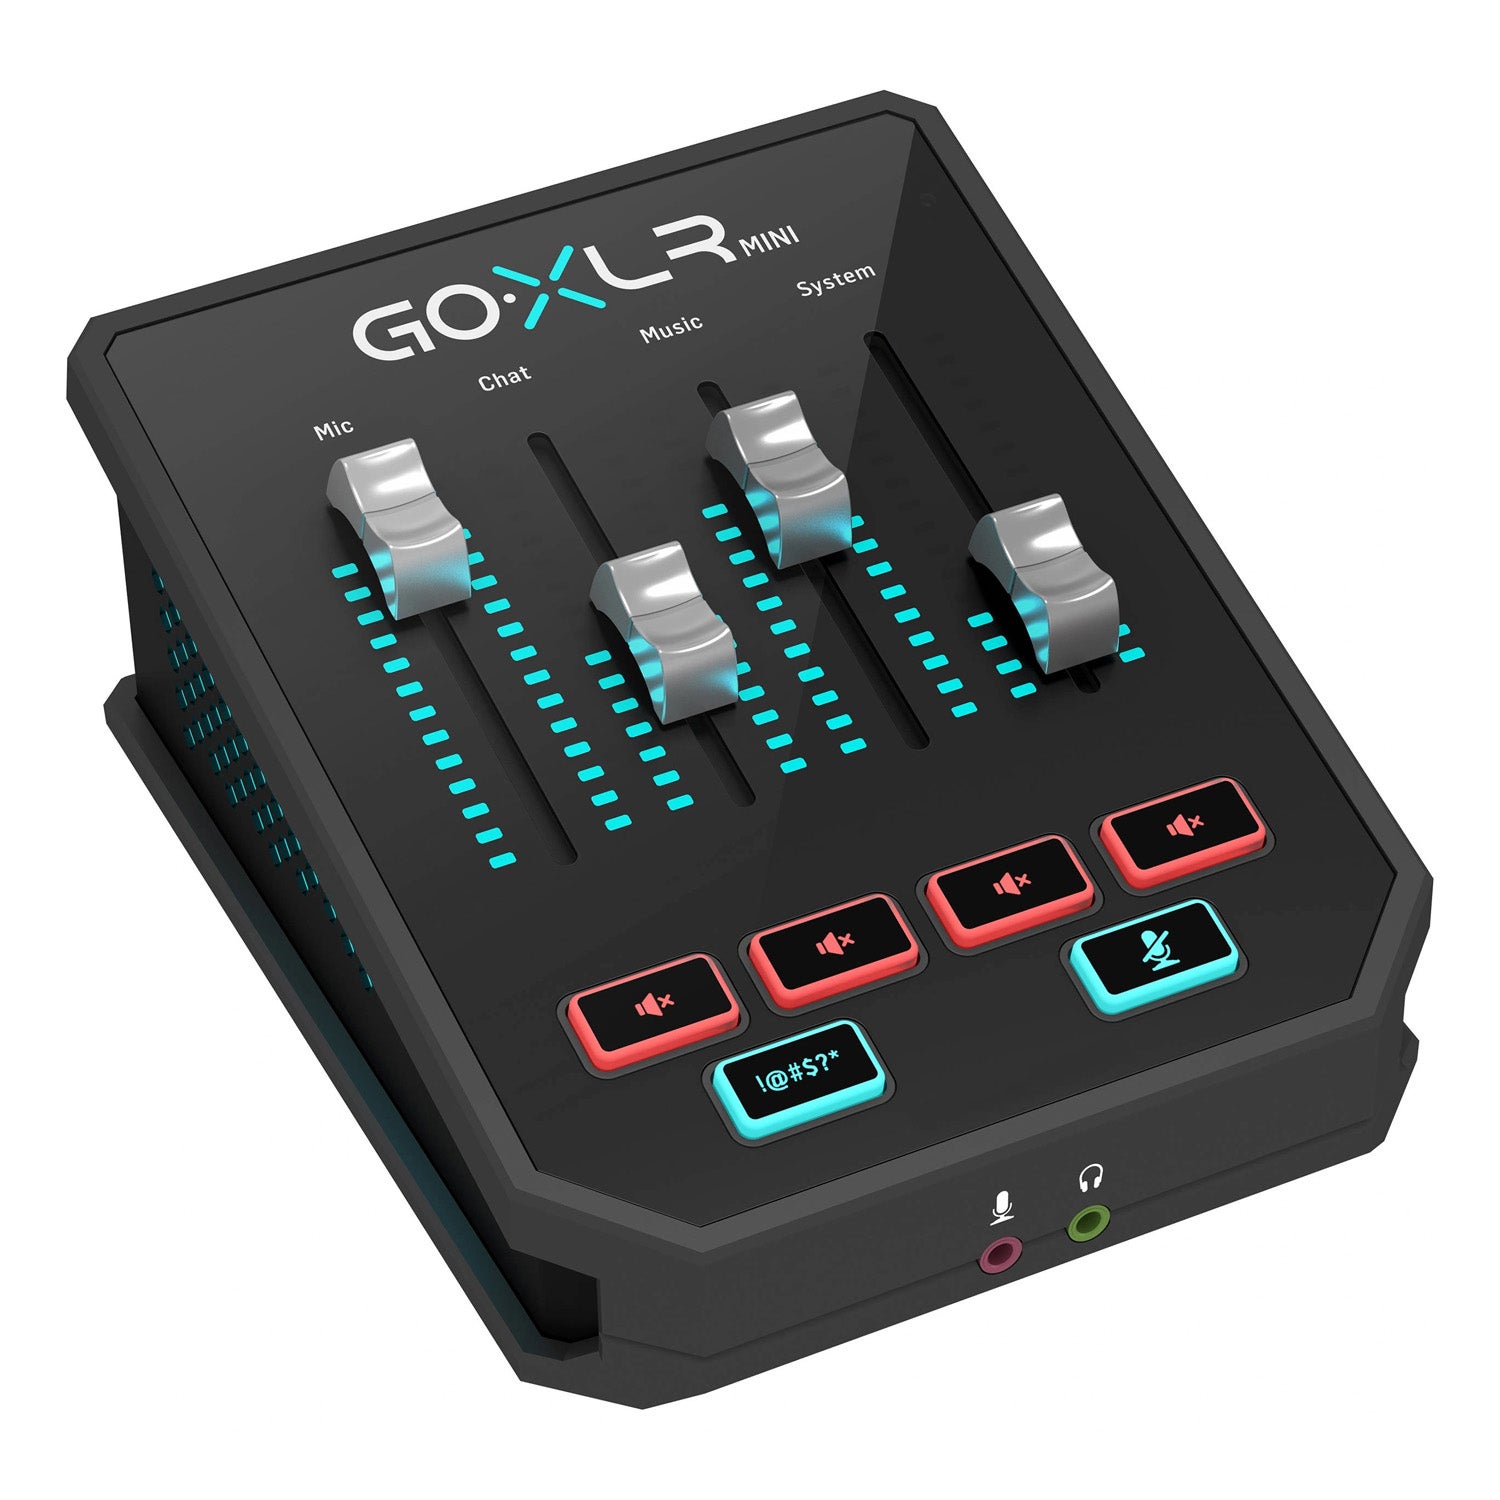 https://www.musicworks.co.nz/content/products/tc-helicon-goxlr-mini-usb-streaming-mixer-with-usbaudio-interface-1-goxlrmini.jpg?canvas=1:1&width=2500